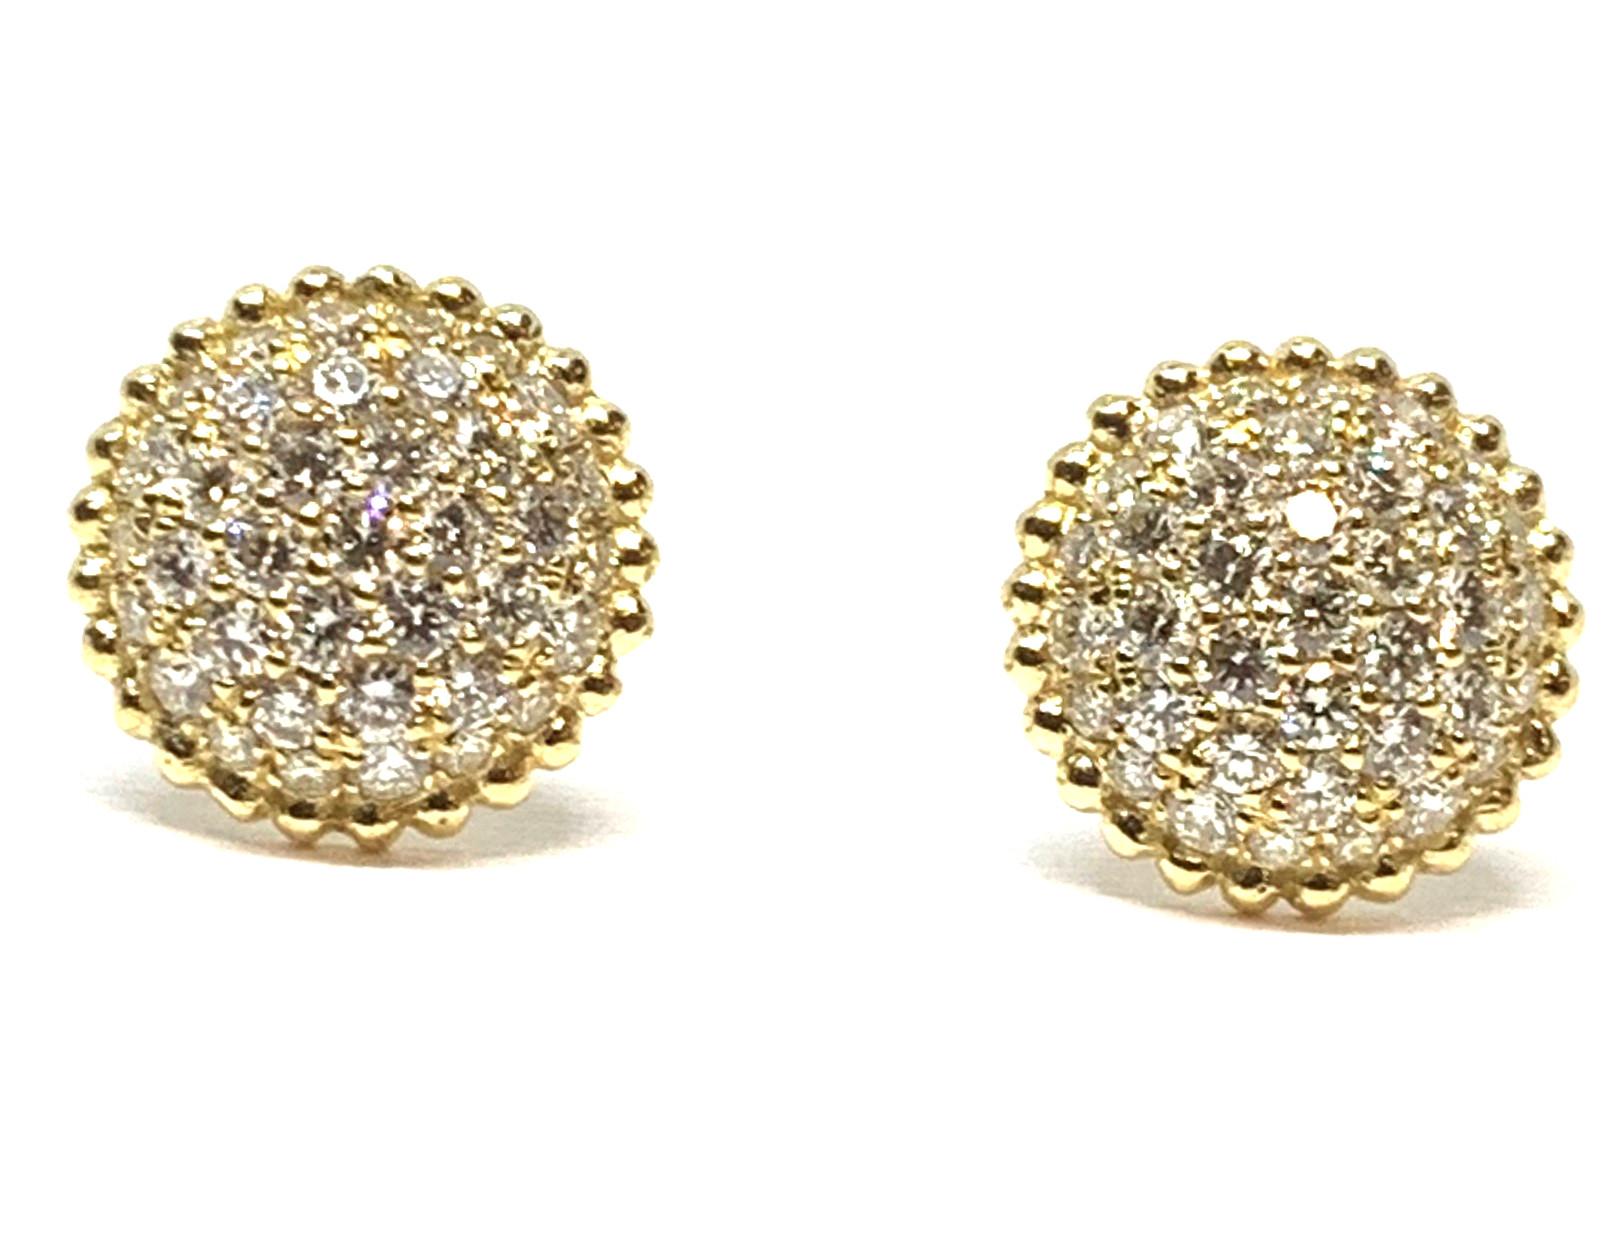 Artisan Diamond Pave Domed Earrings in 18K Yellow Gold, .84 Carat Total For Sale